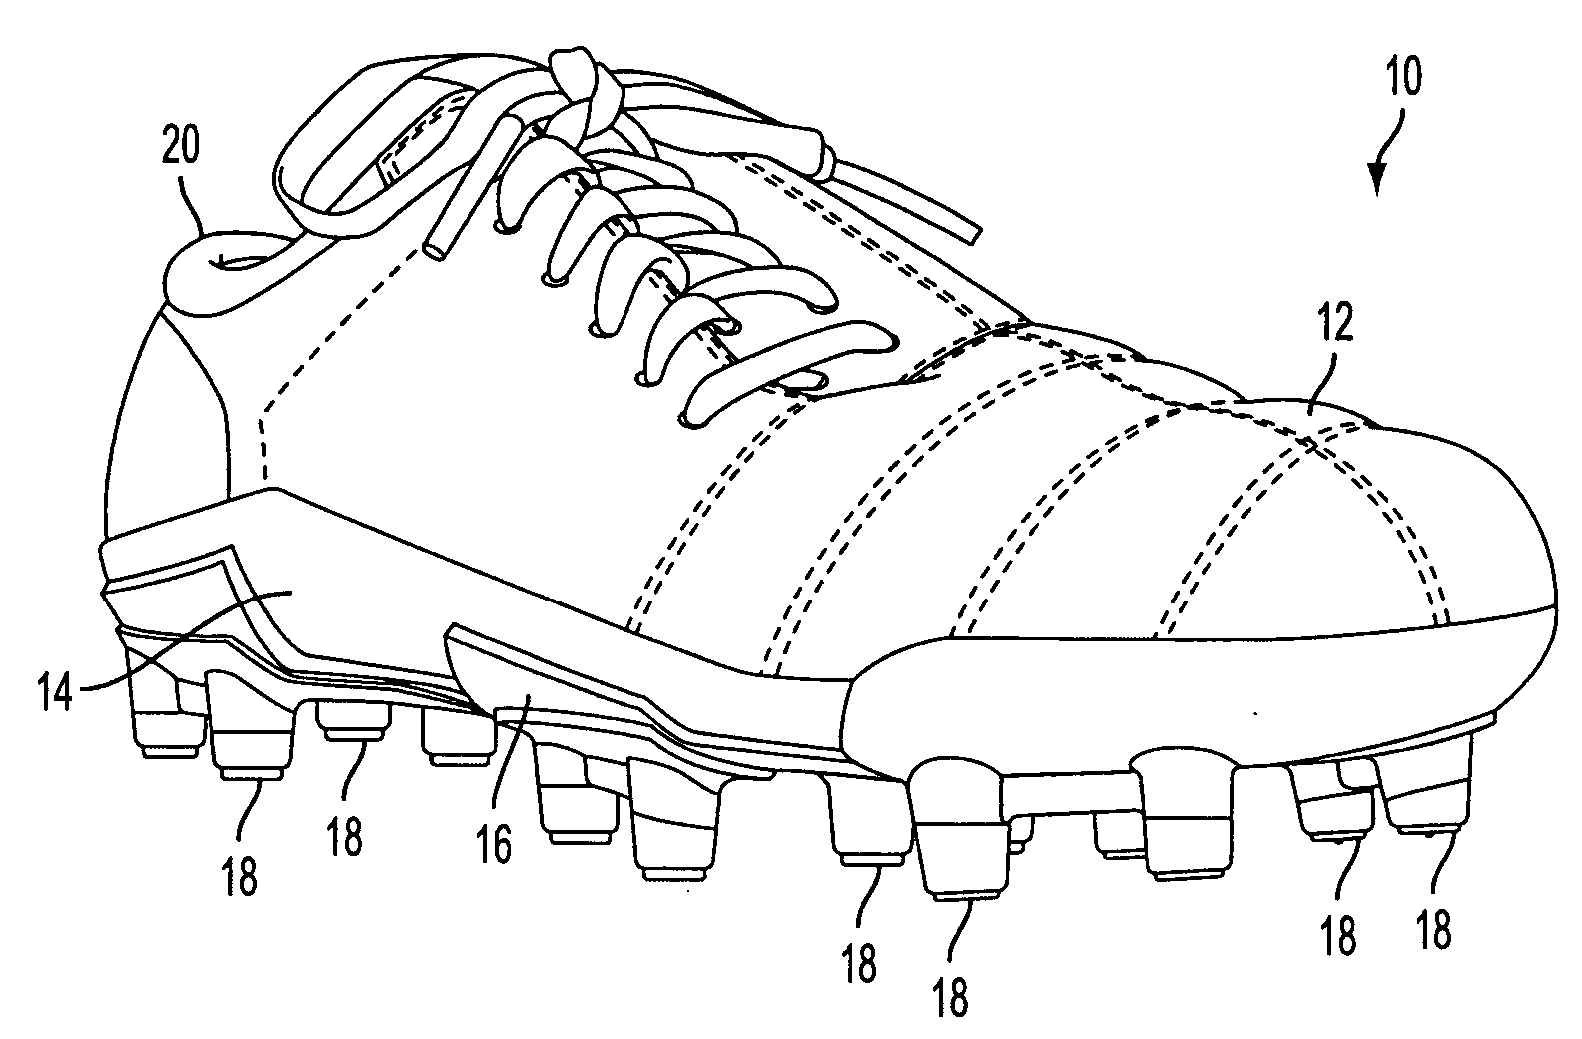 Soccer shoe having independently supported lateral and medial sides